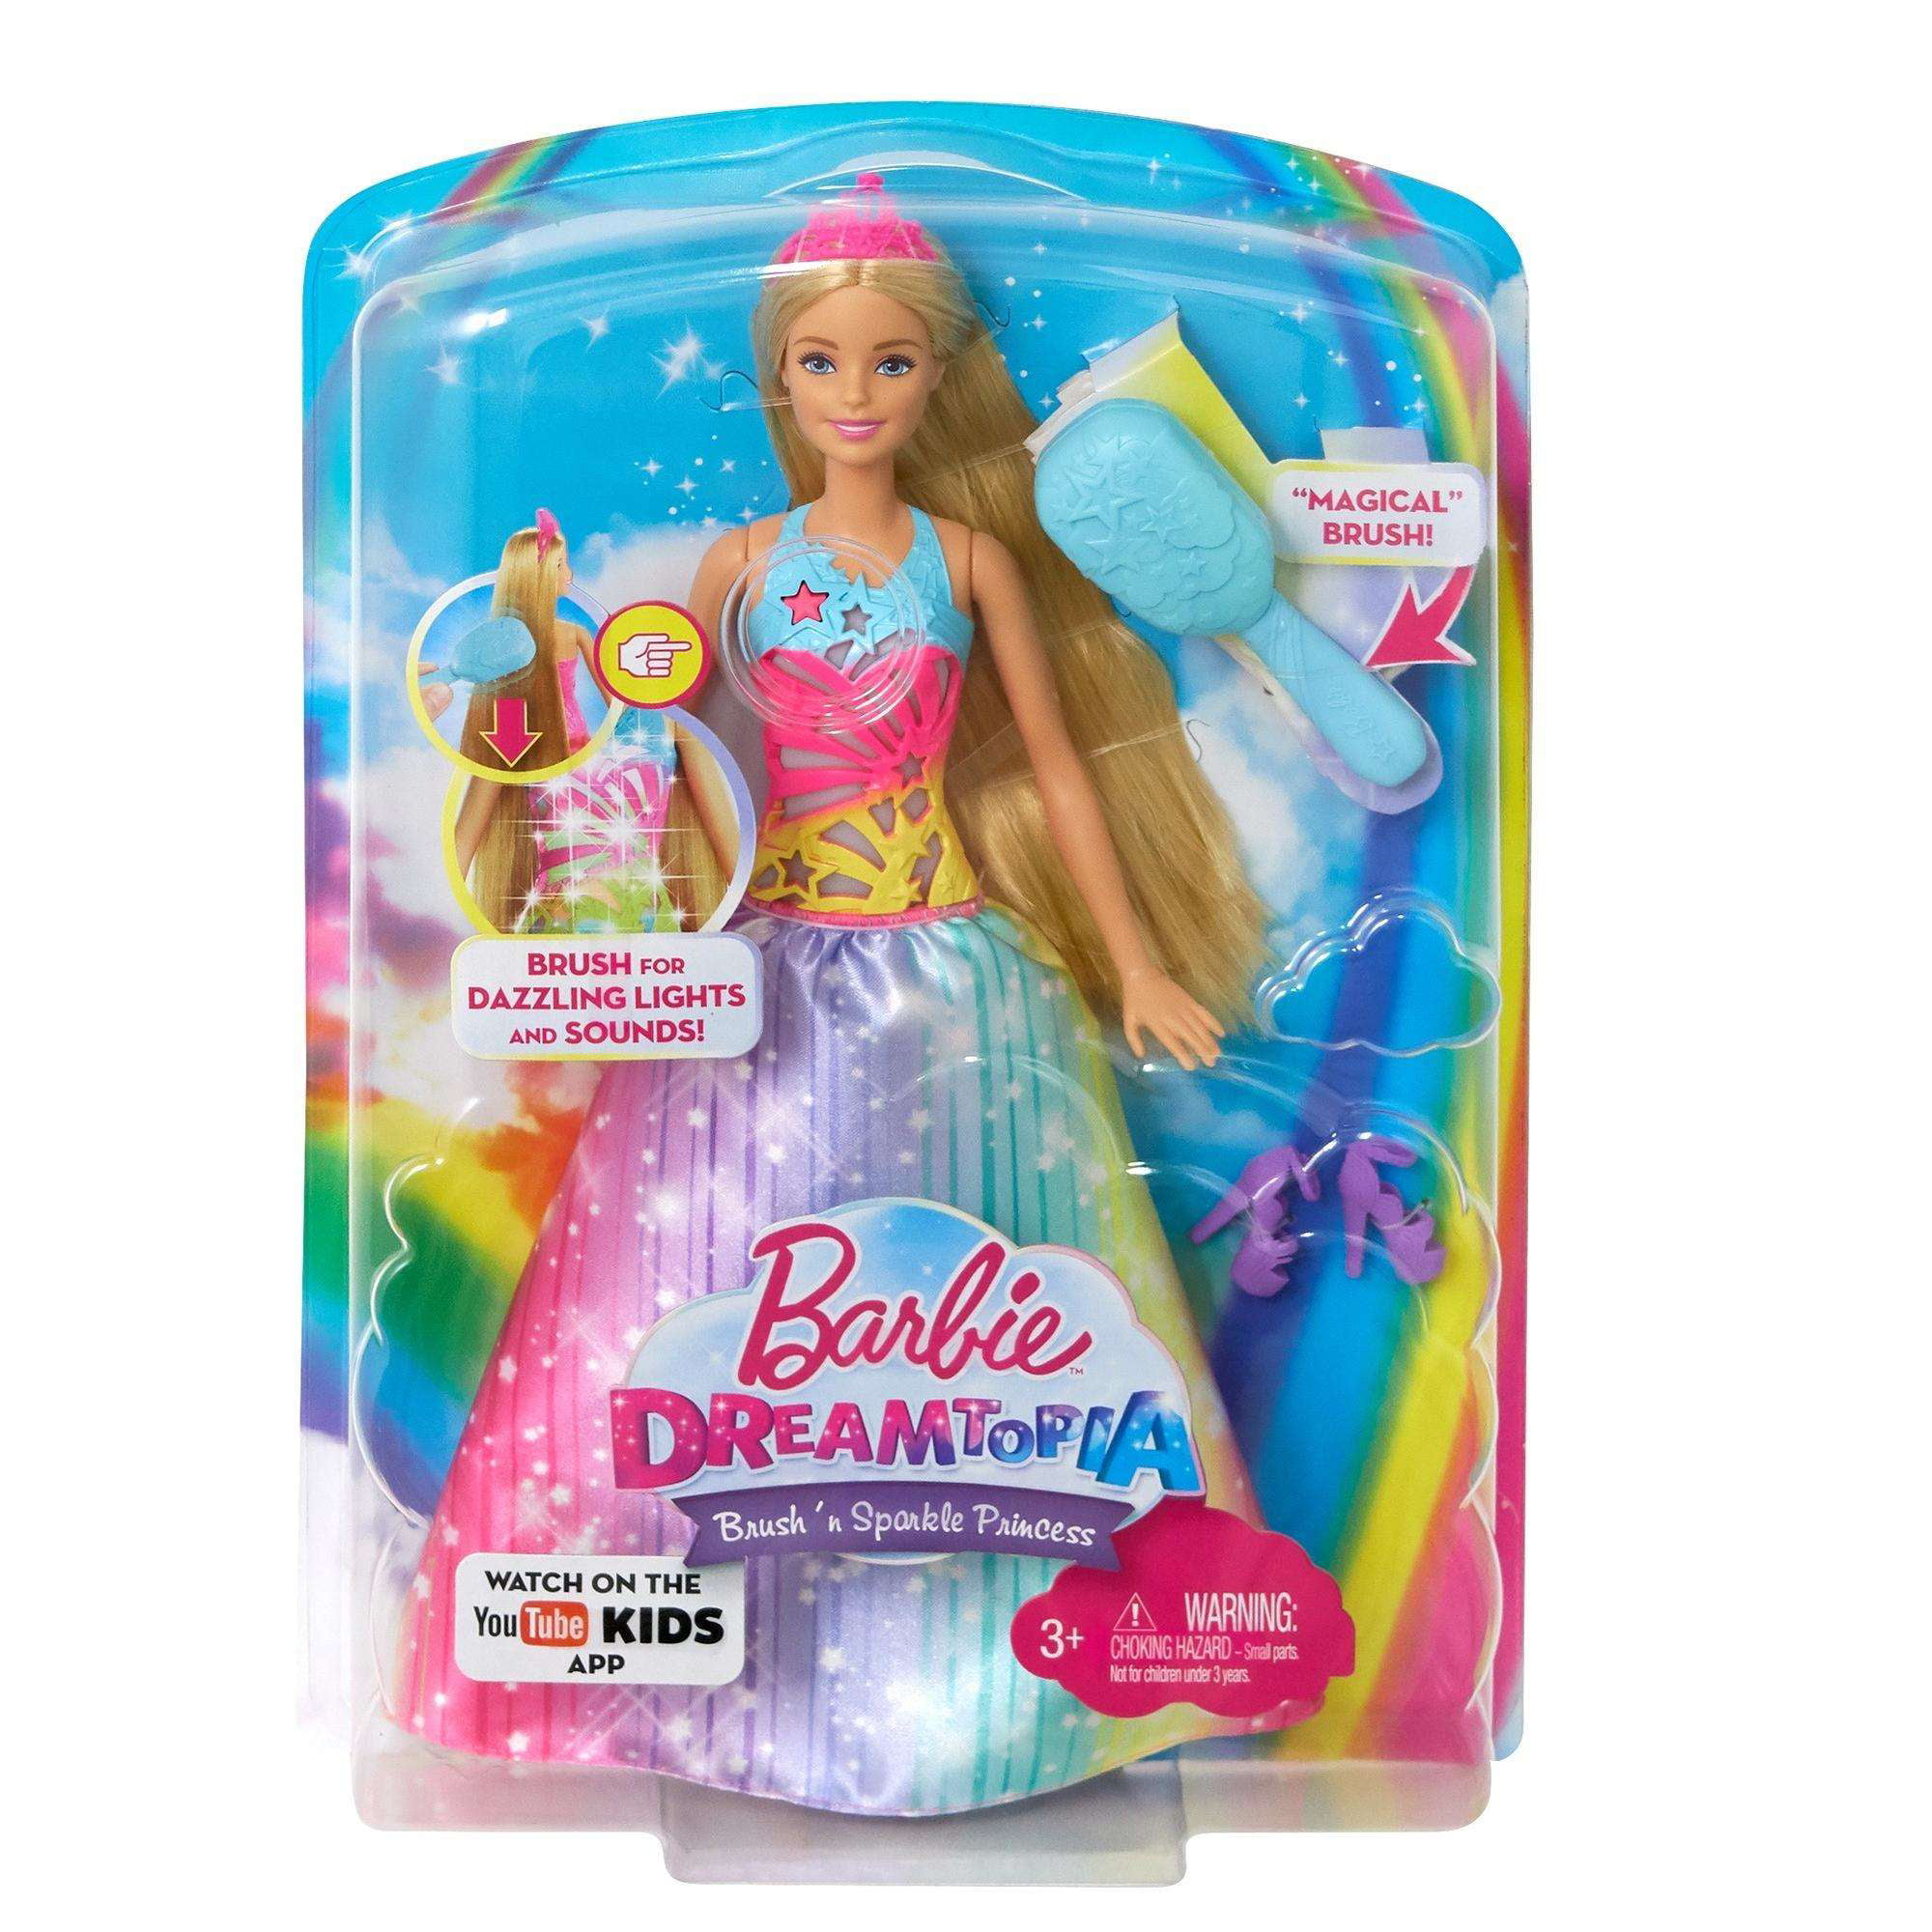 Barbie - Welcome to Barbie Dreamtopia! A magical new series from Barbie  where imagination has no limits. Where will your little one's imagination  take them next?